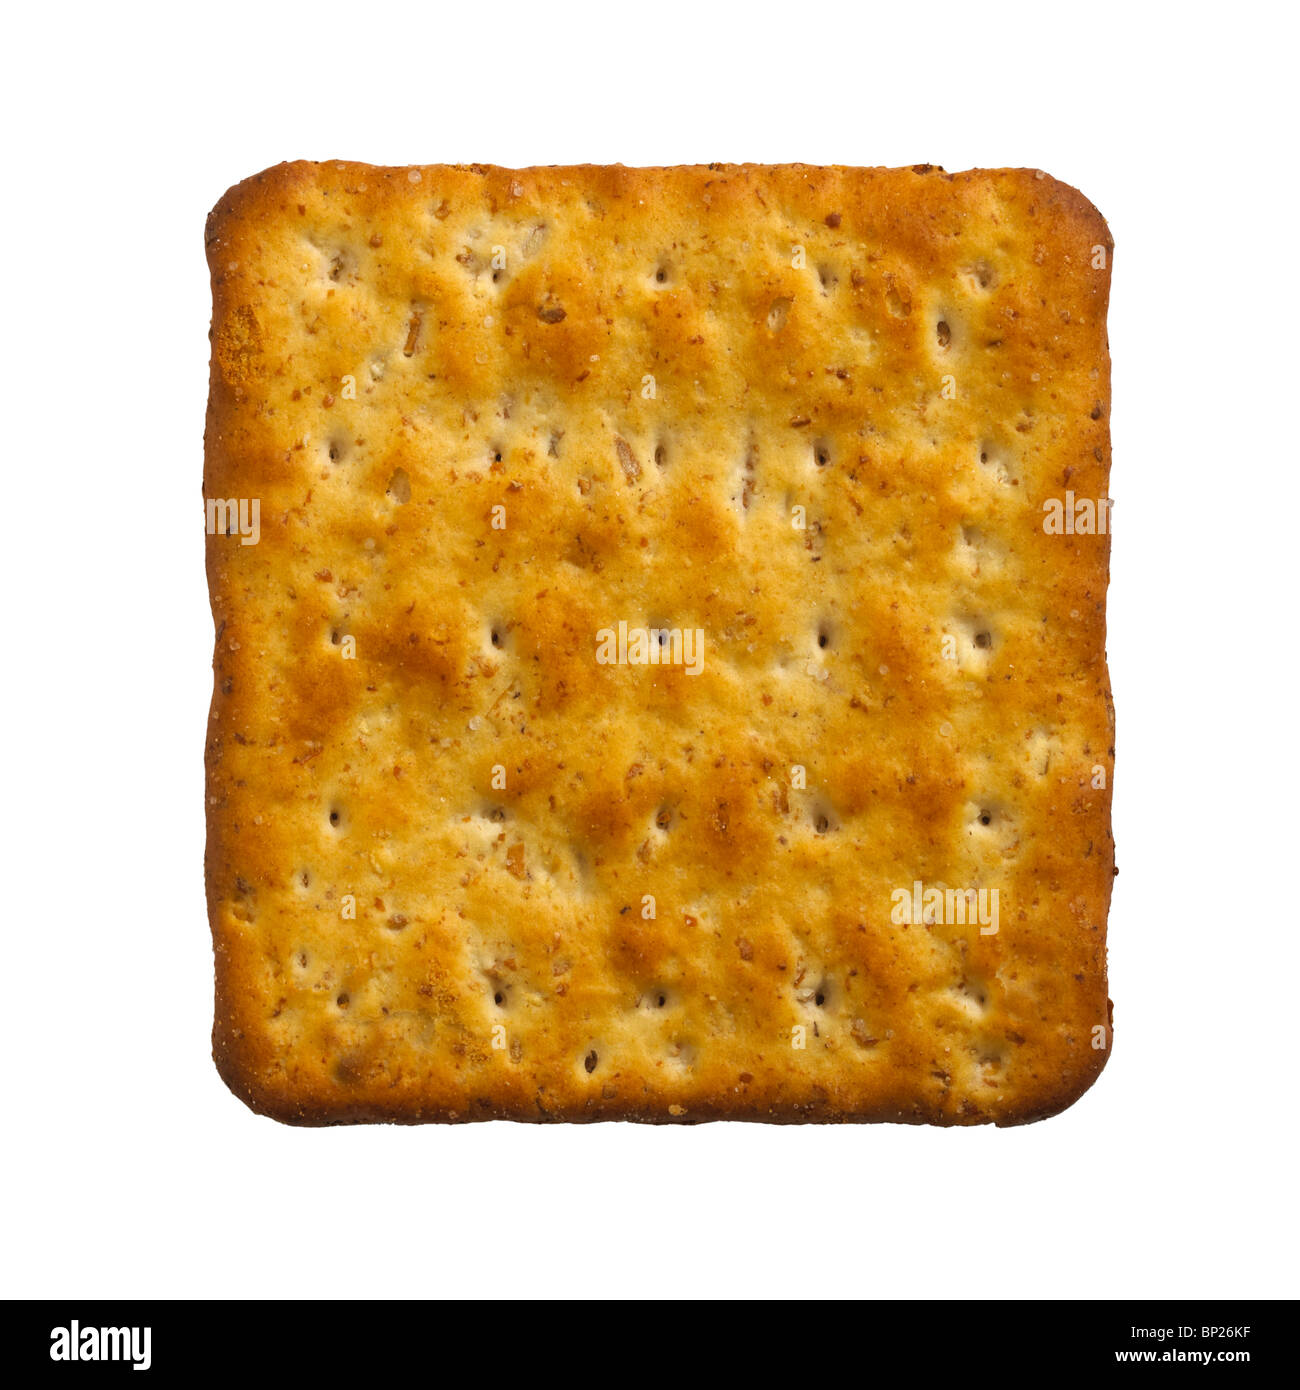 SINGLE CHEESE CRACKER BISCUIT ON WHITE BACKGROUND Stock Photo